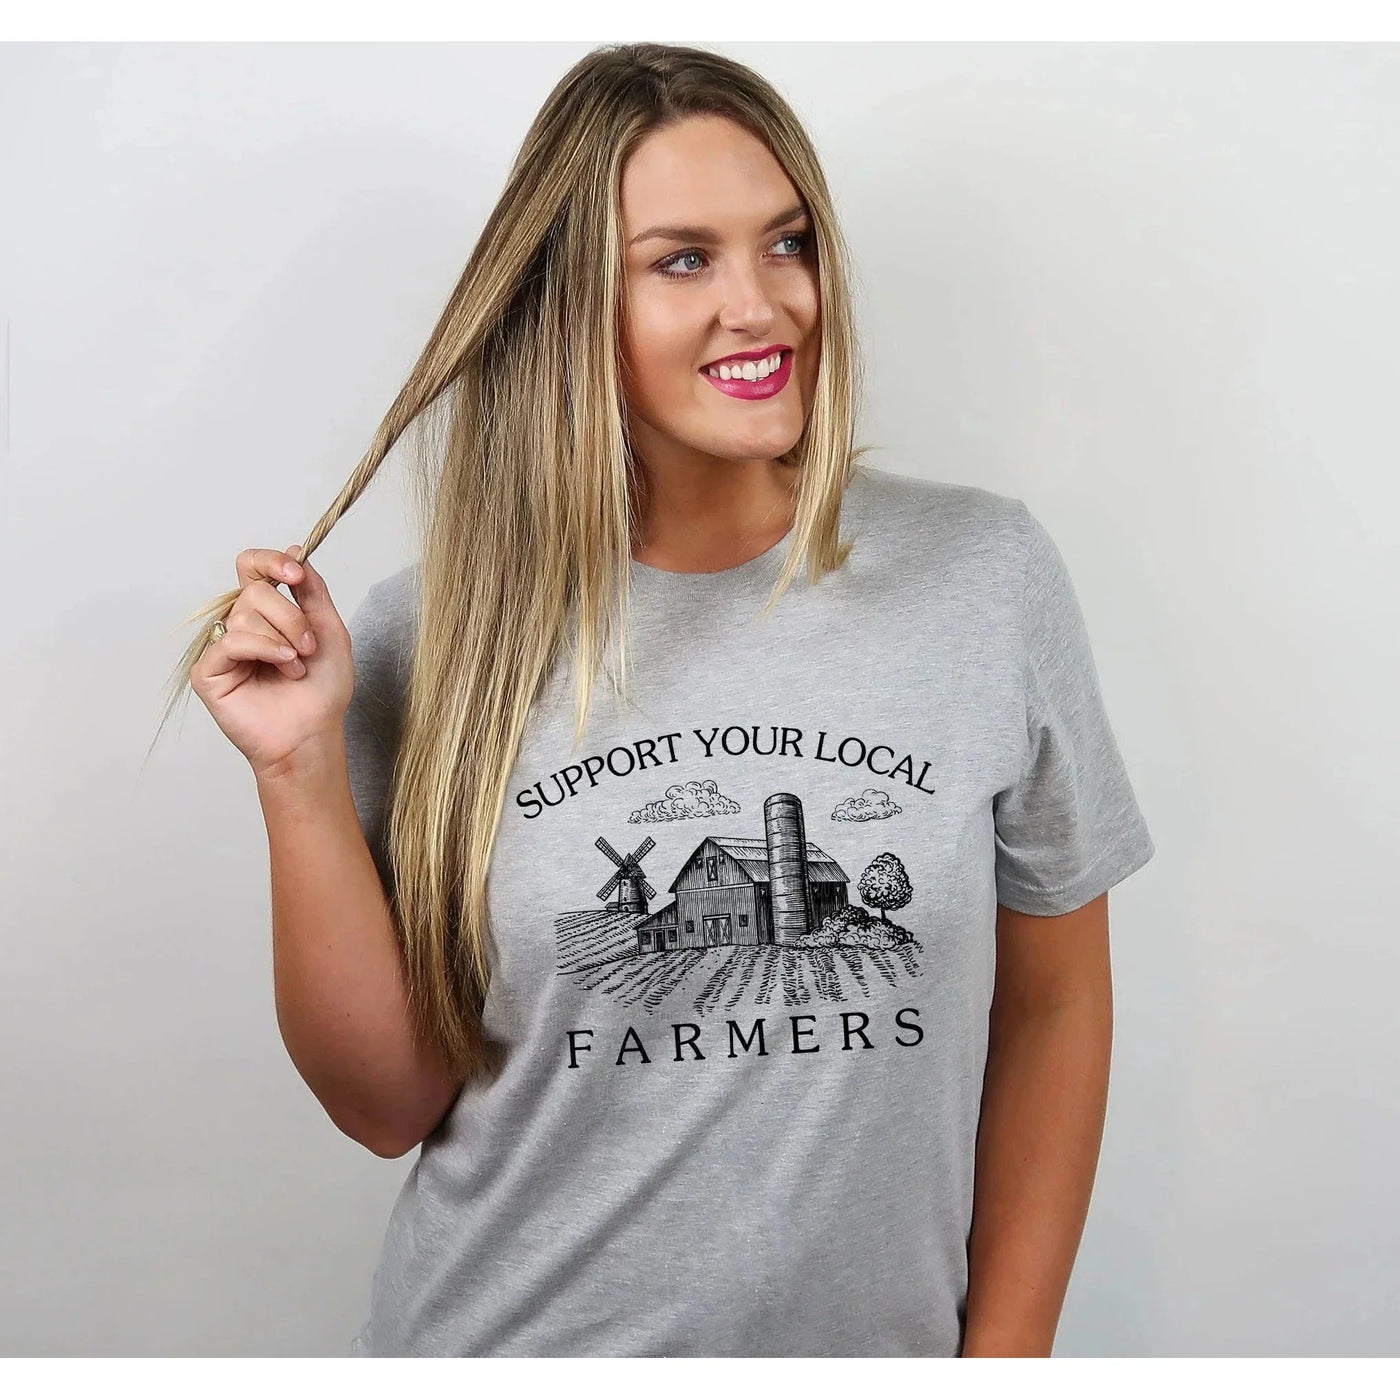 Support Your Local Farmers Graphic Tee/Sweatshirt